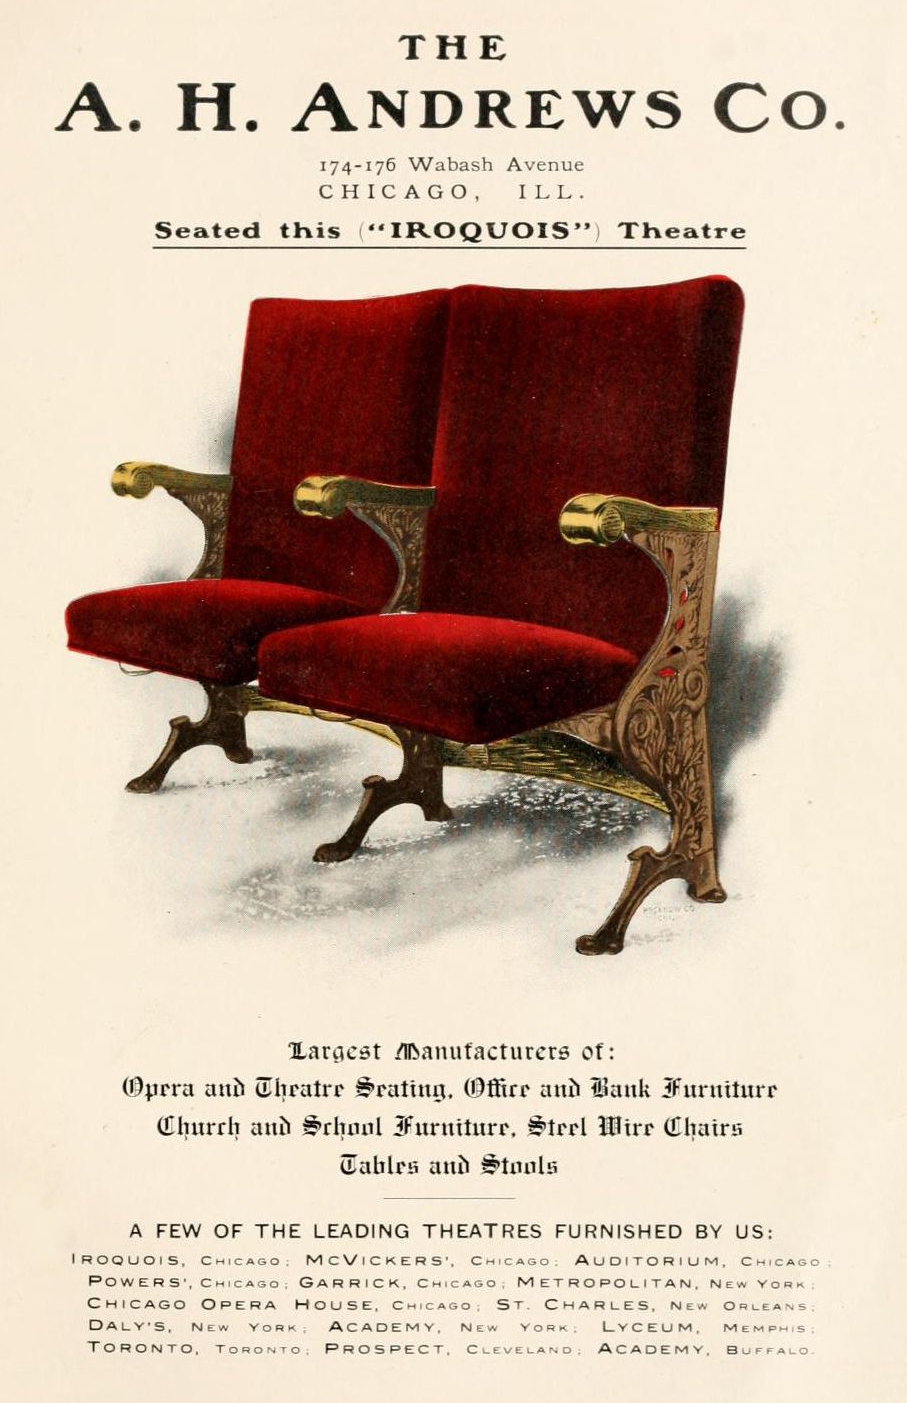 A.H. Andrews was a major supplier of comercial furniture